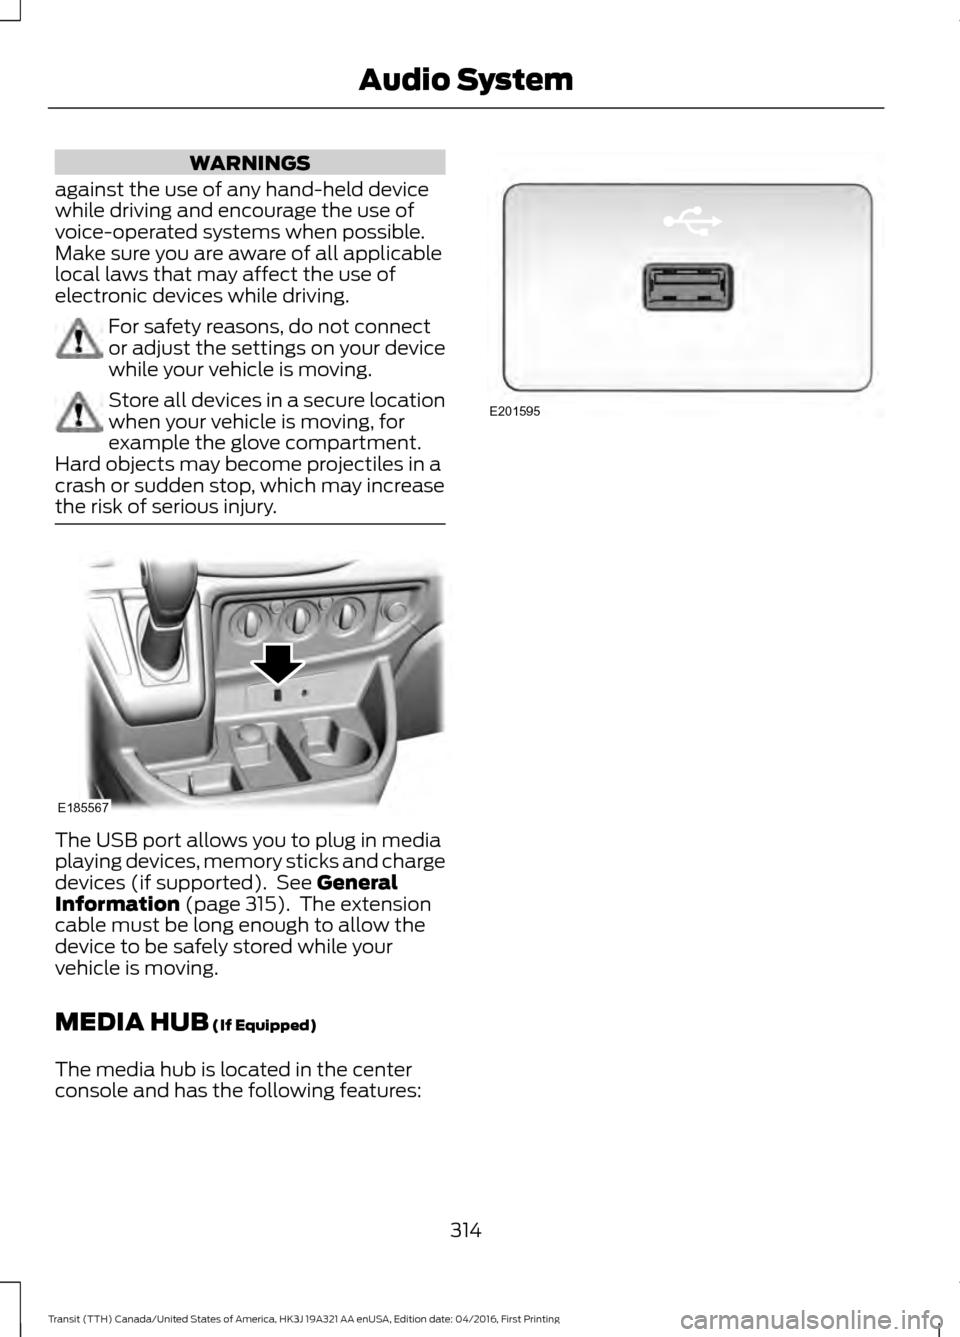 FORD TRANSIT 2017 5.G Owners Manual WARNINGS
against the use of any hand-held device
while driving and encourage the use of
voice-operated systems when possible.
Make sure you are aware of all applicable
local laws that may affect the u